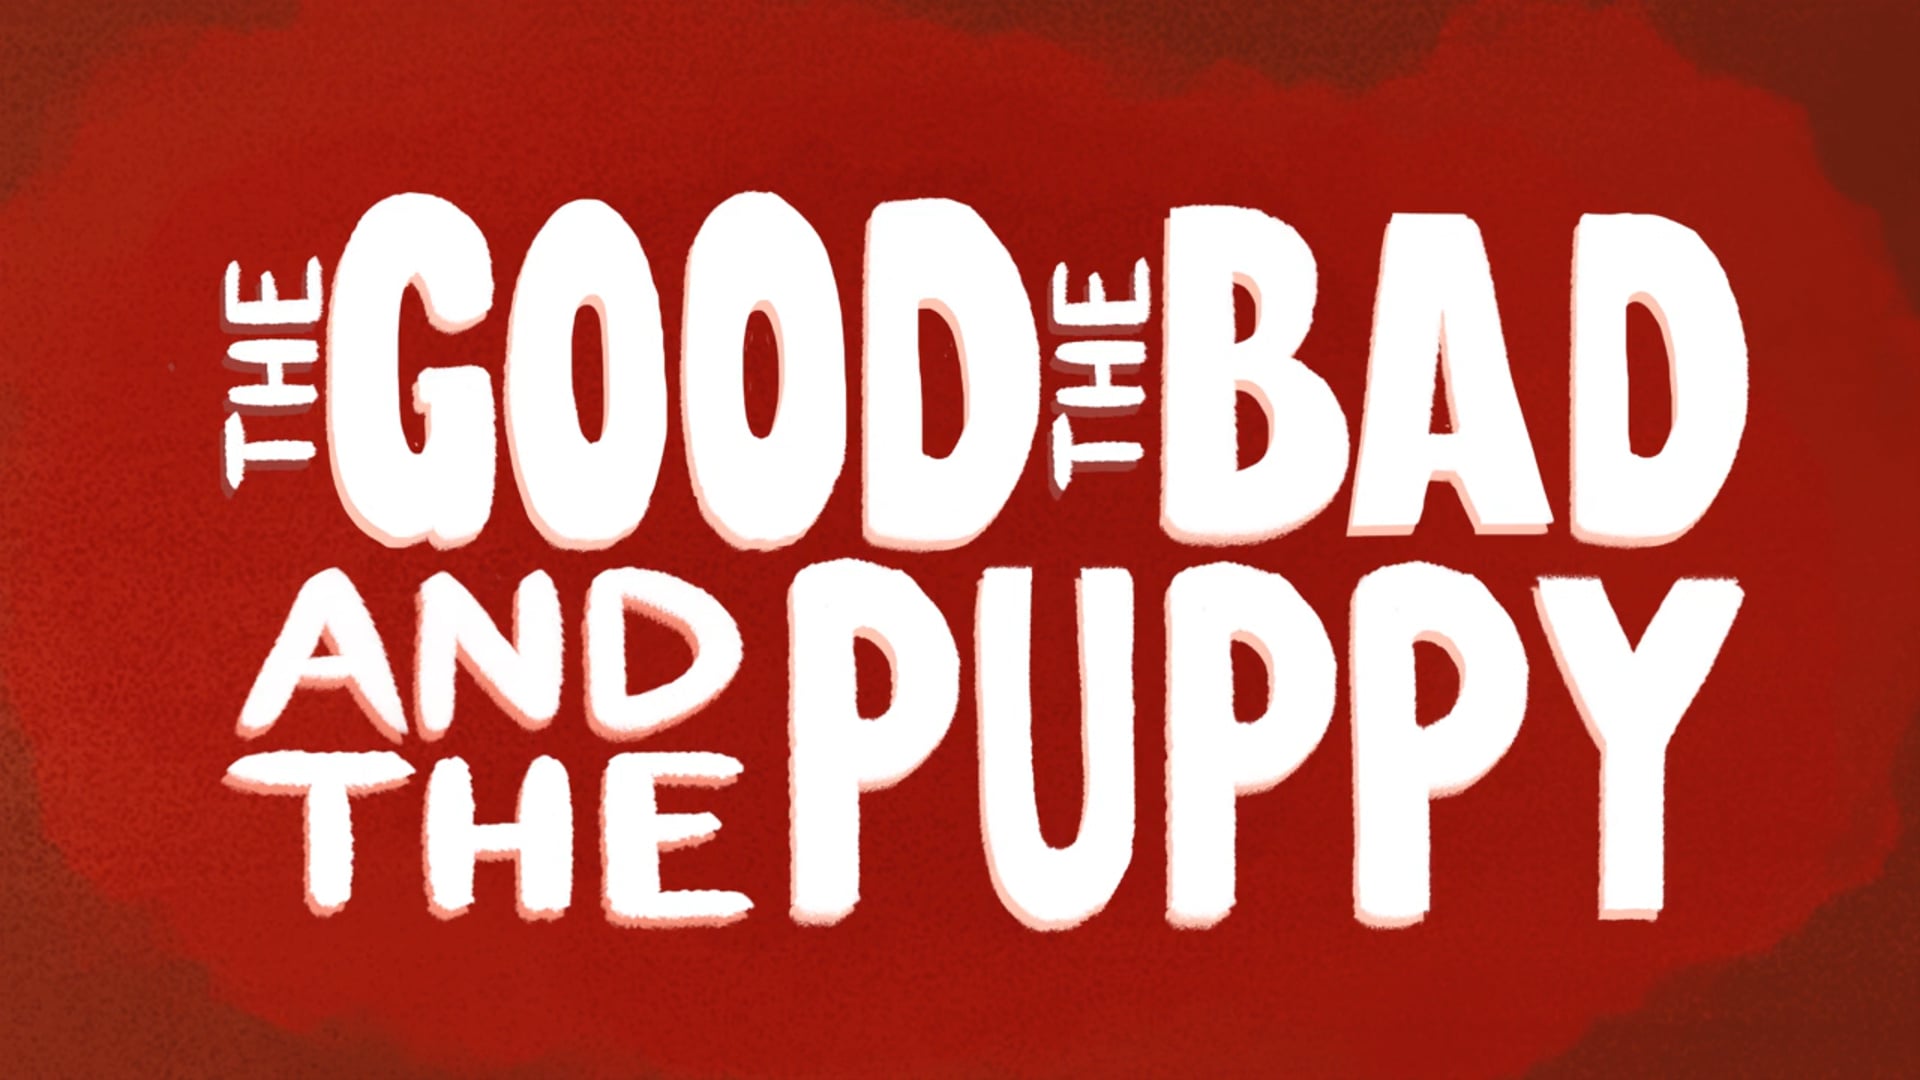 The Good, the Bad and the Puppy